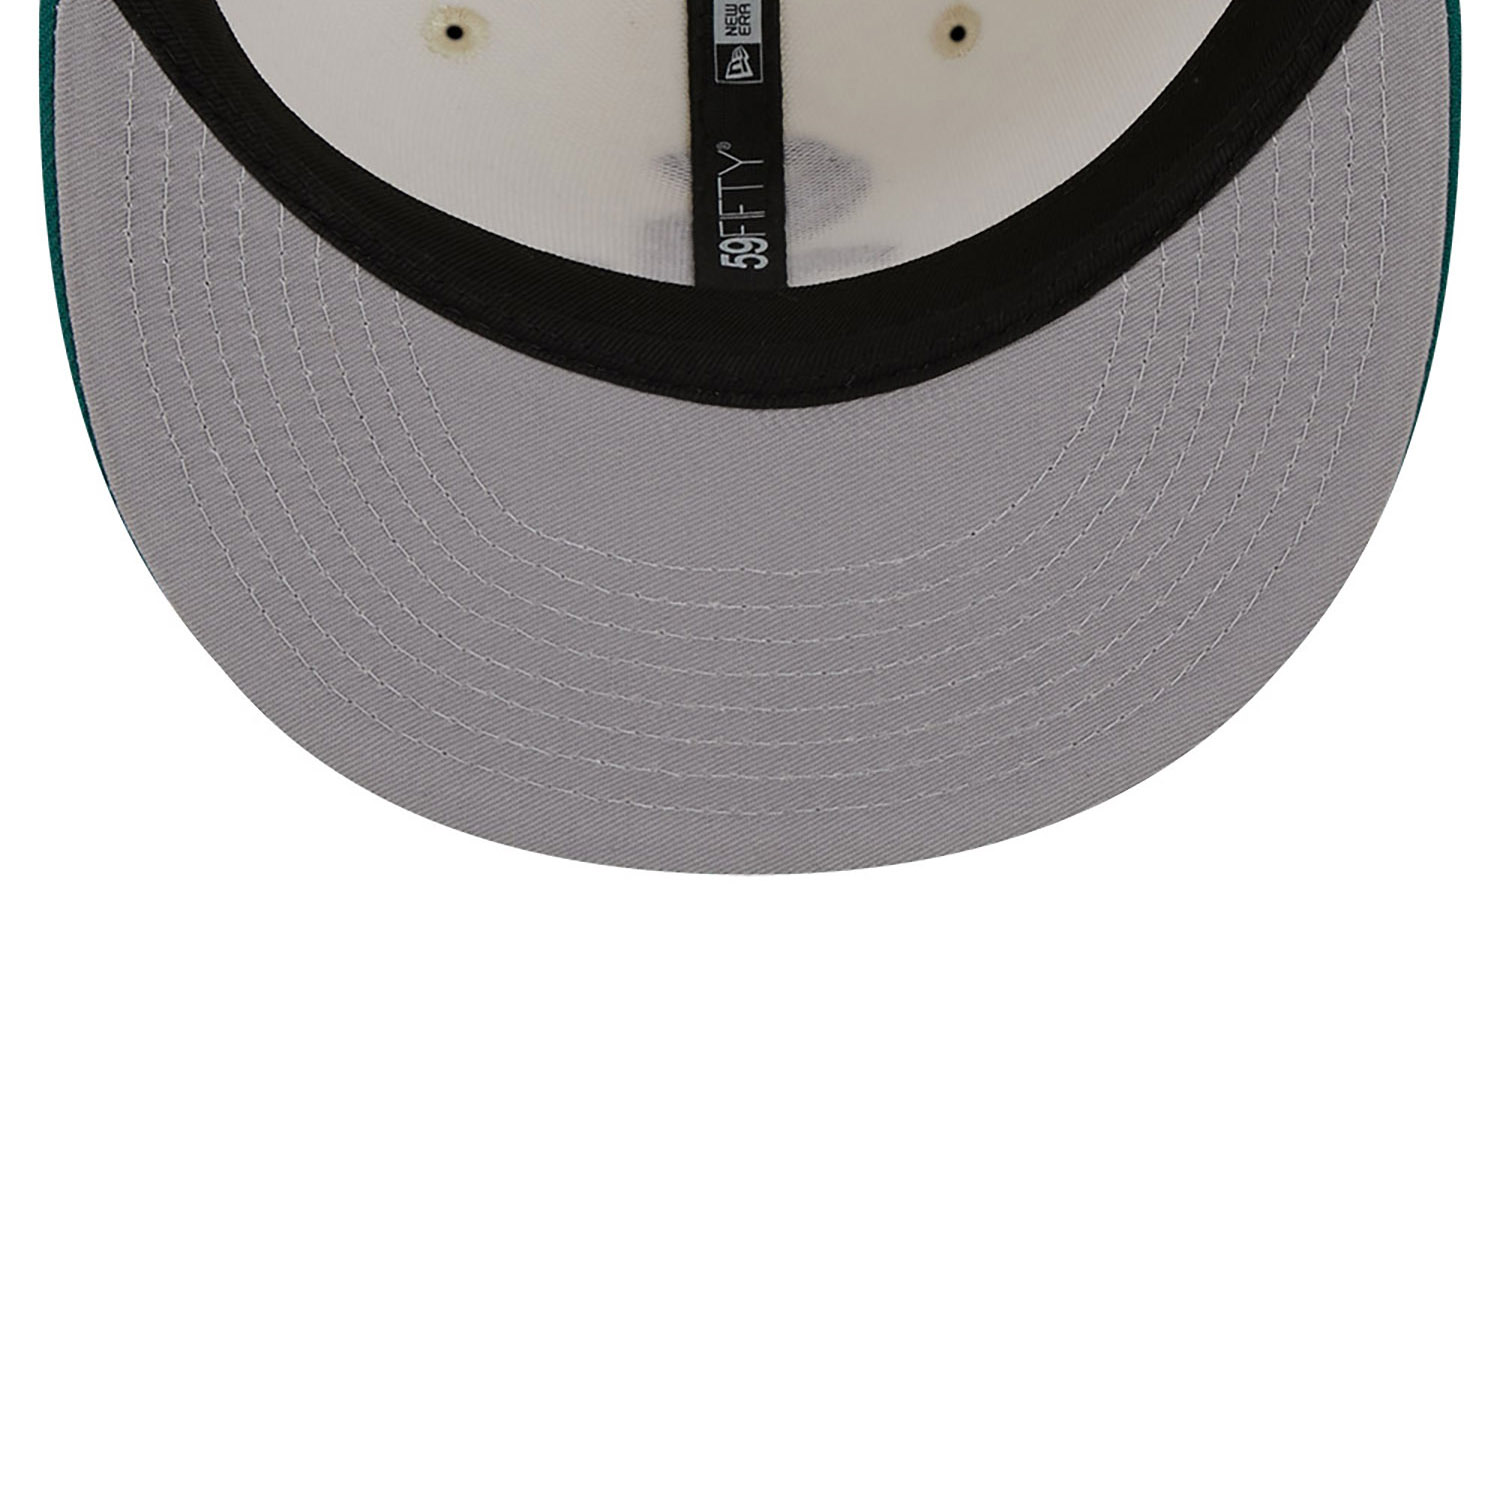 Chicago White Sox Camp Off White 59FIFTY Fitted Cap